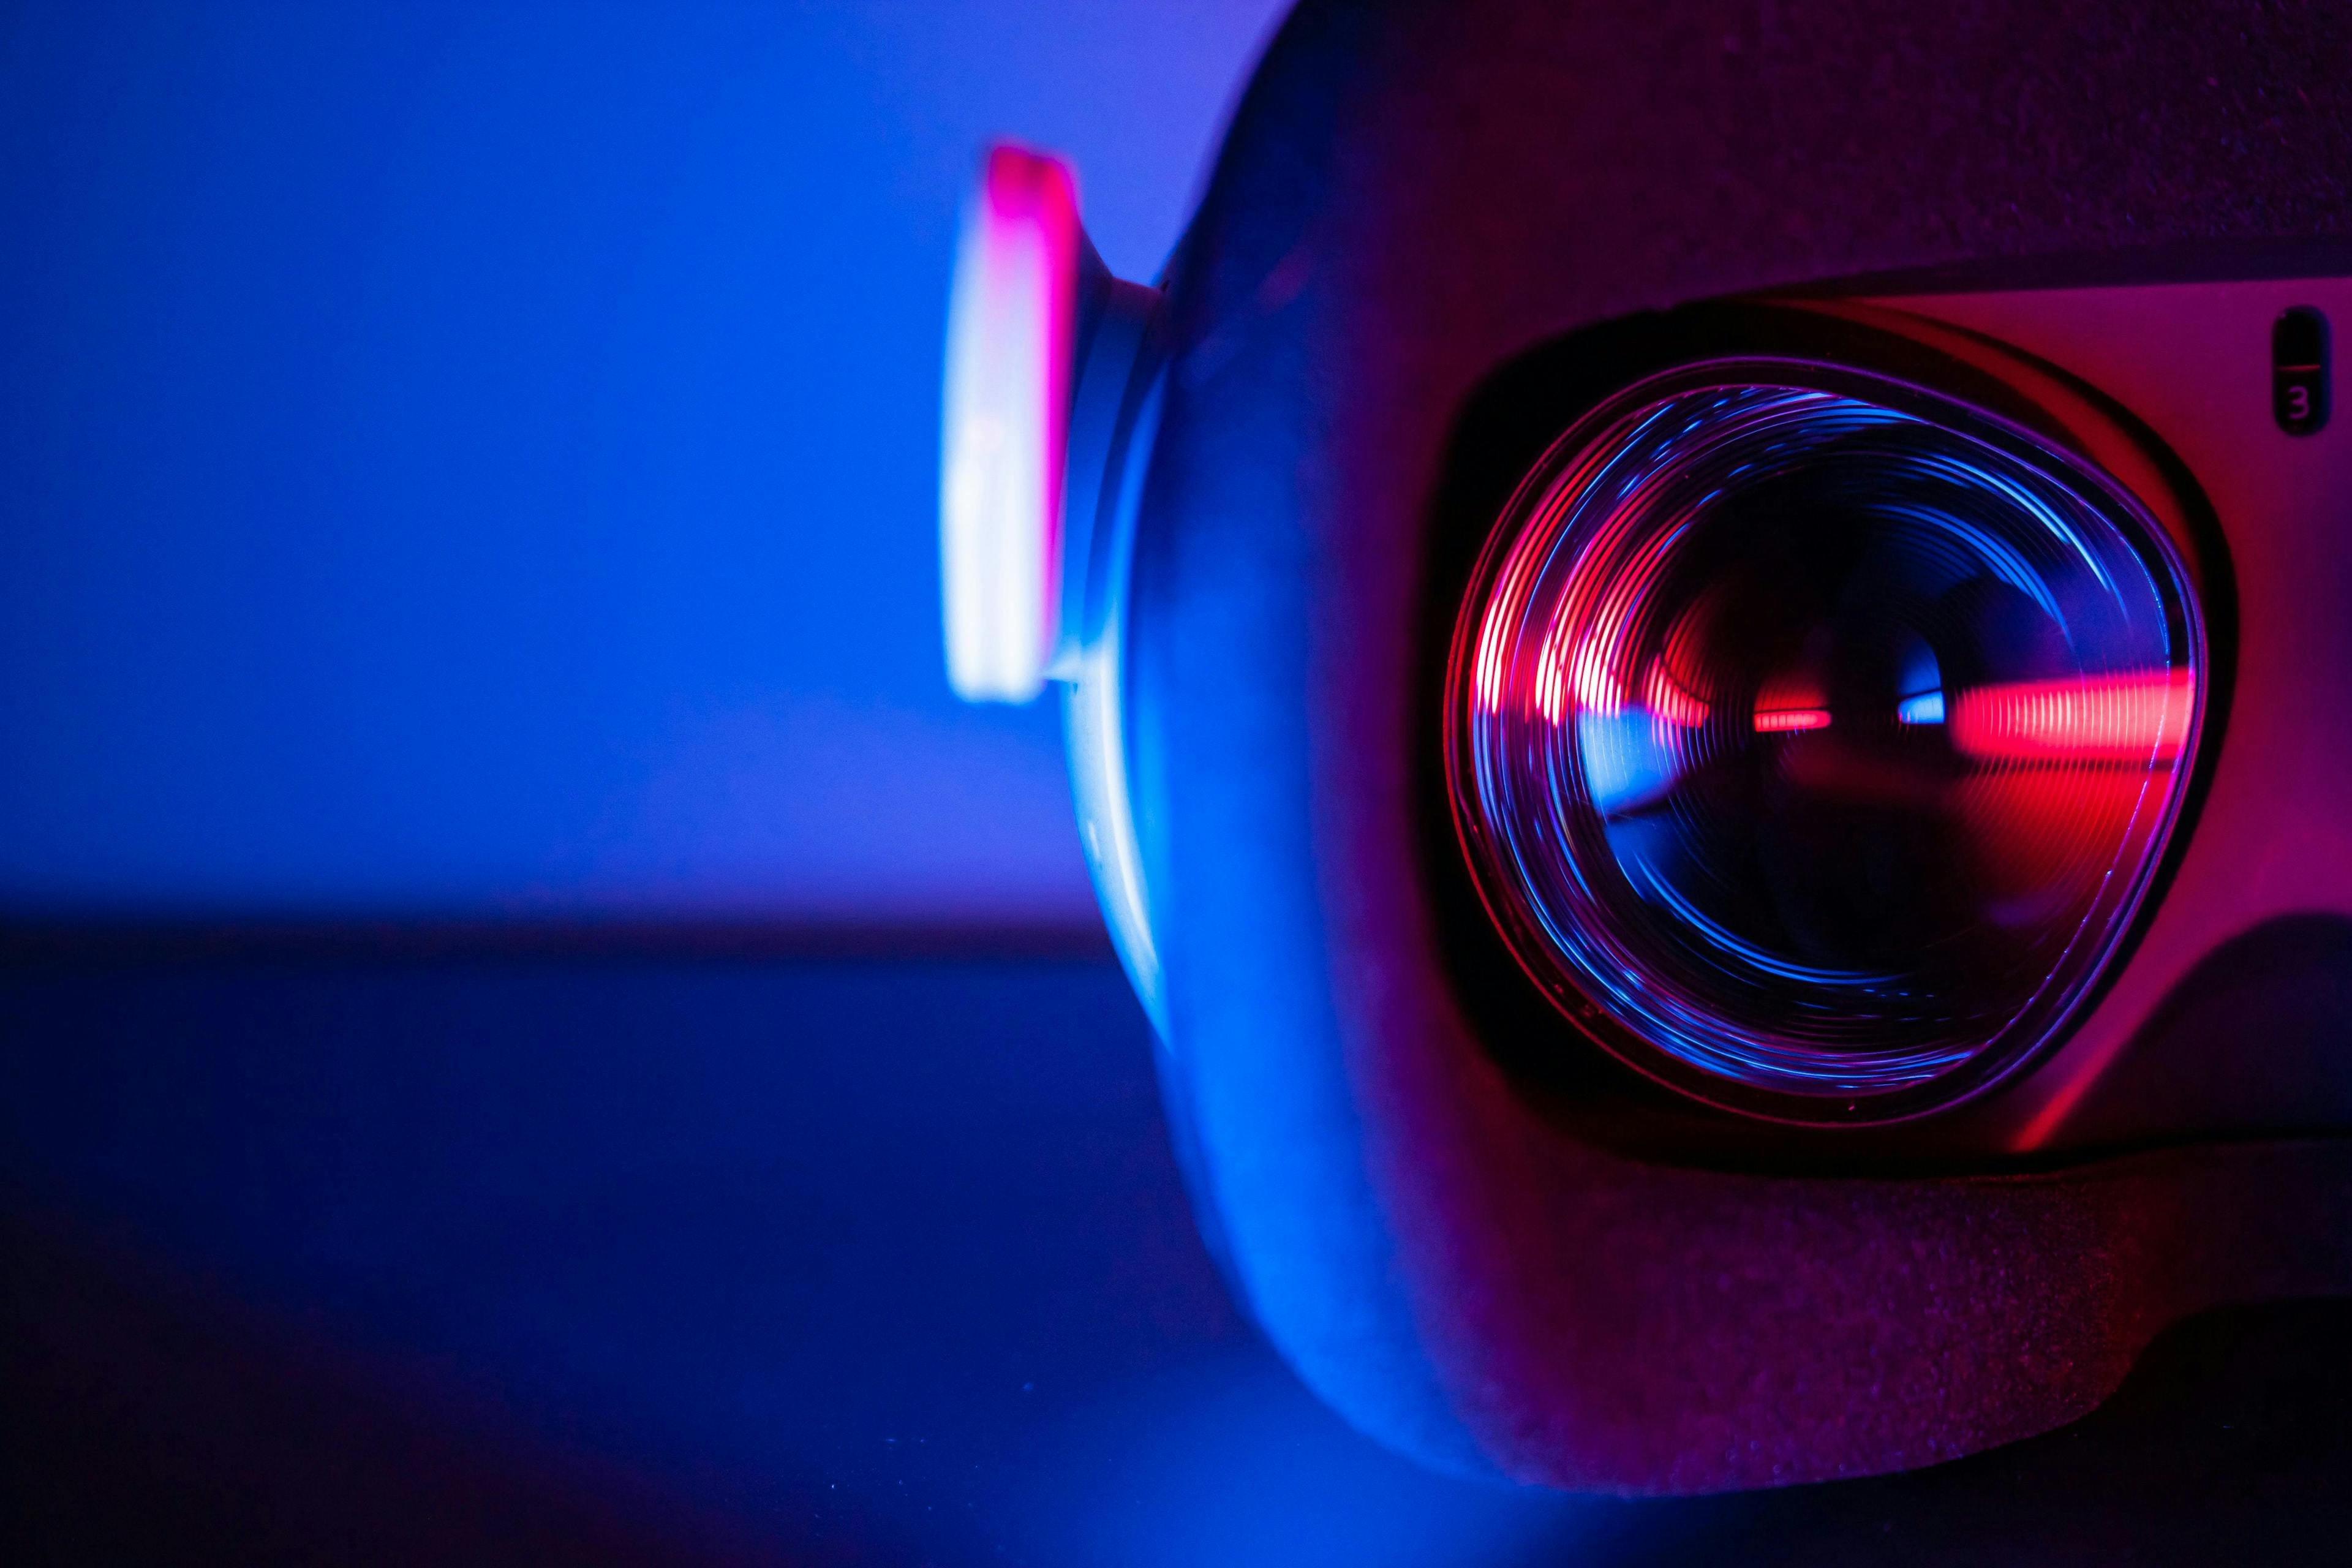 A close-up of a virtual reality headset lens glowing with red and blue lights, set against a dark background.